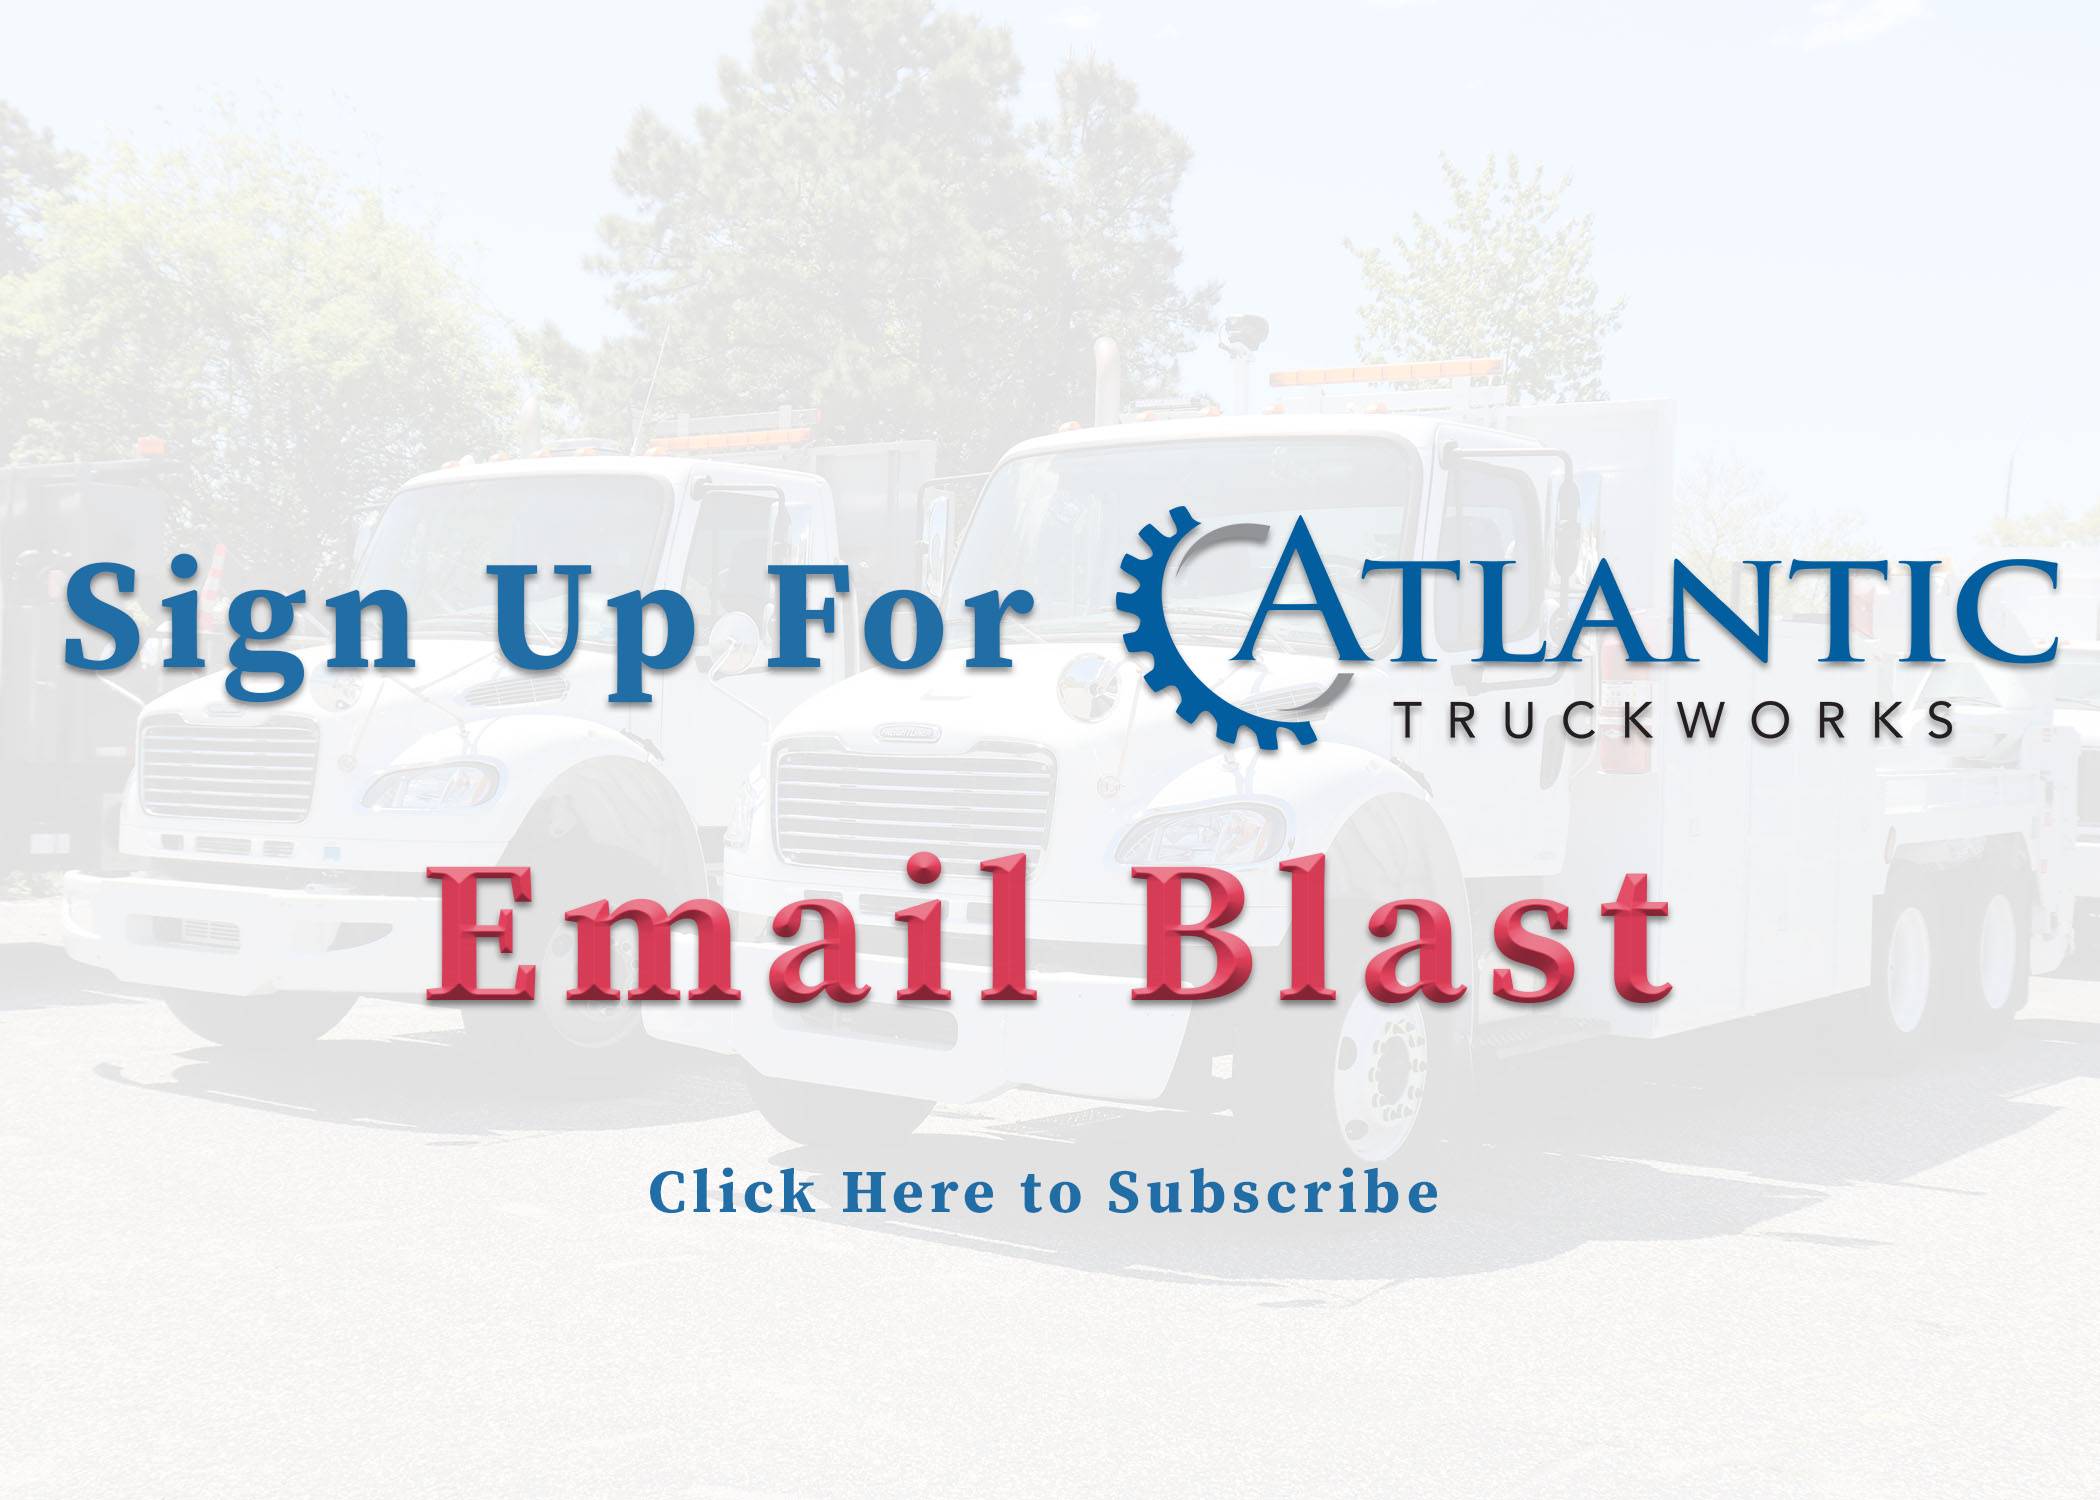 Sign Up for Our Email Blast Today!